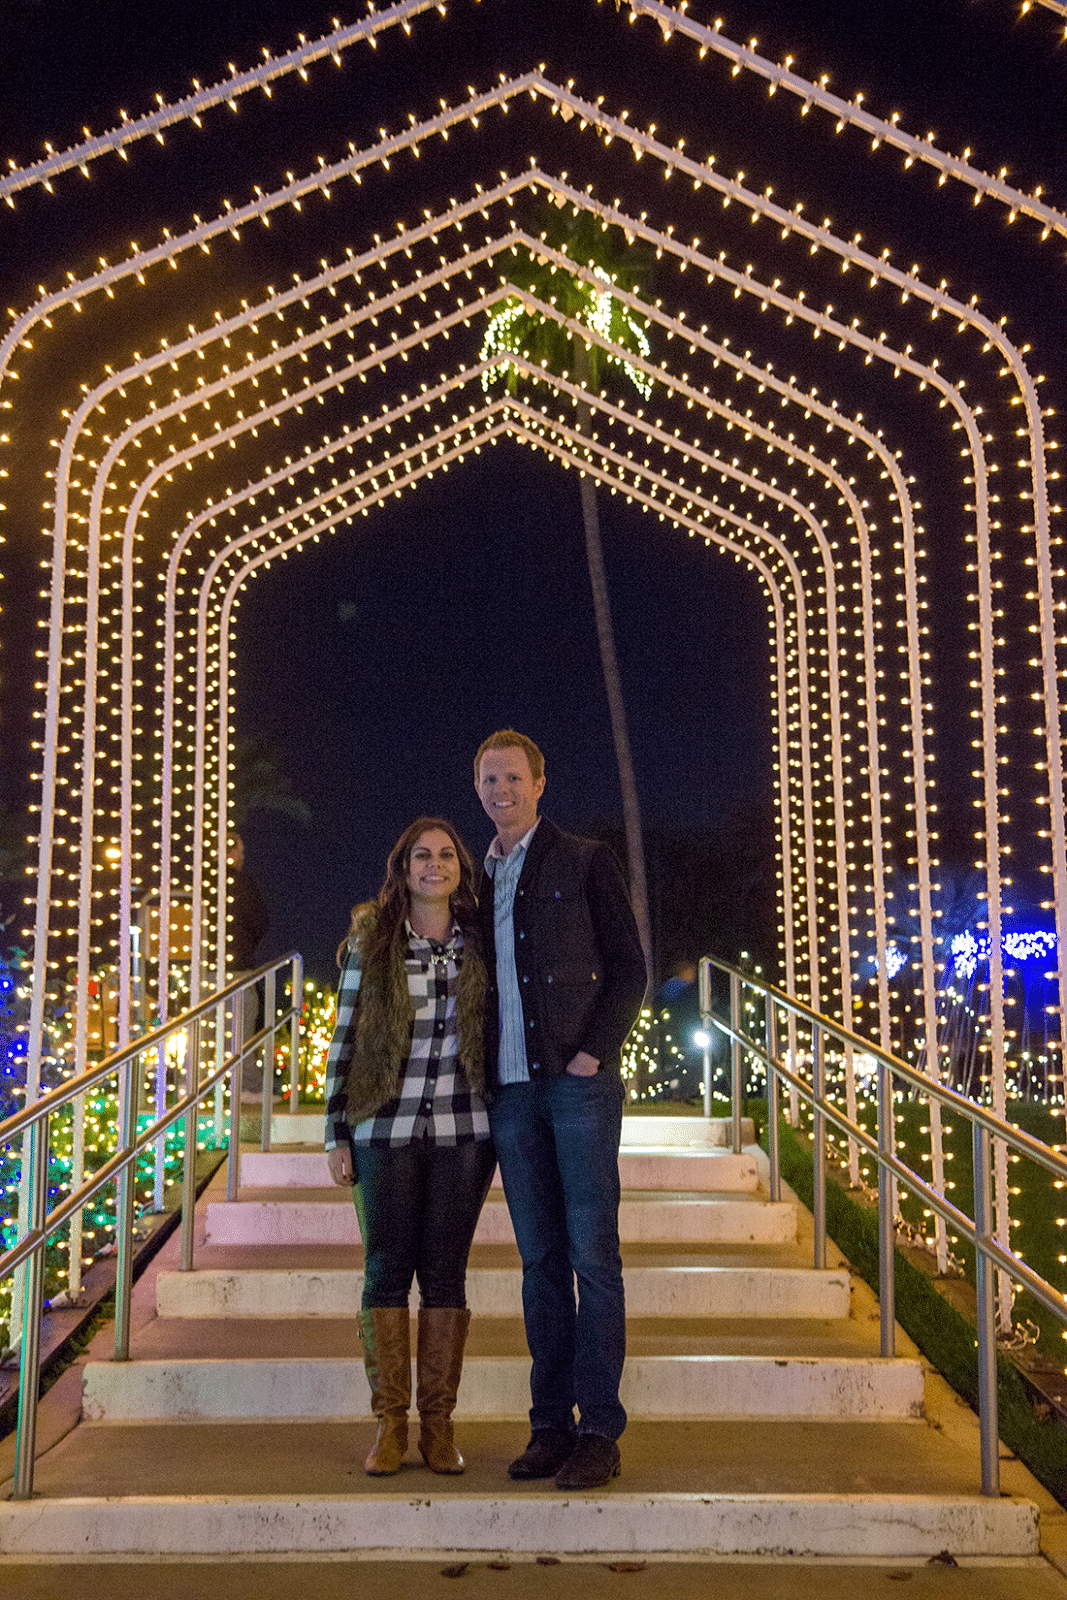 Couple on a date to see Christmas lights. 